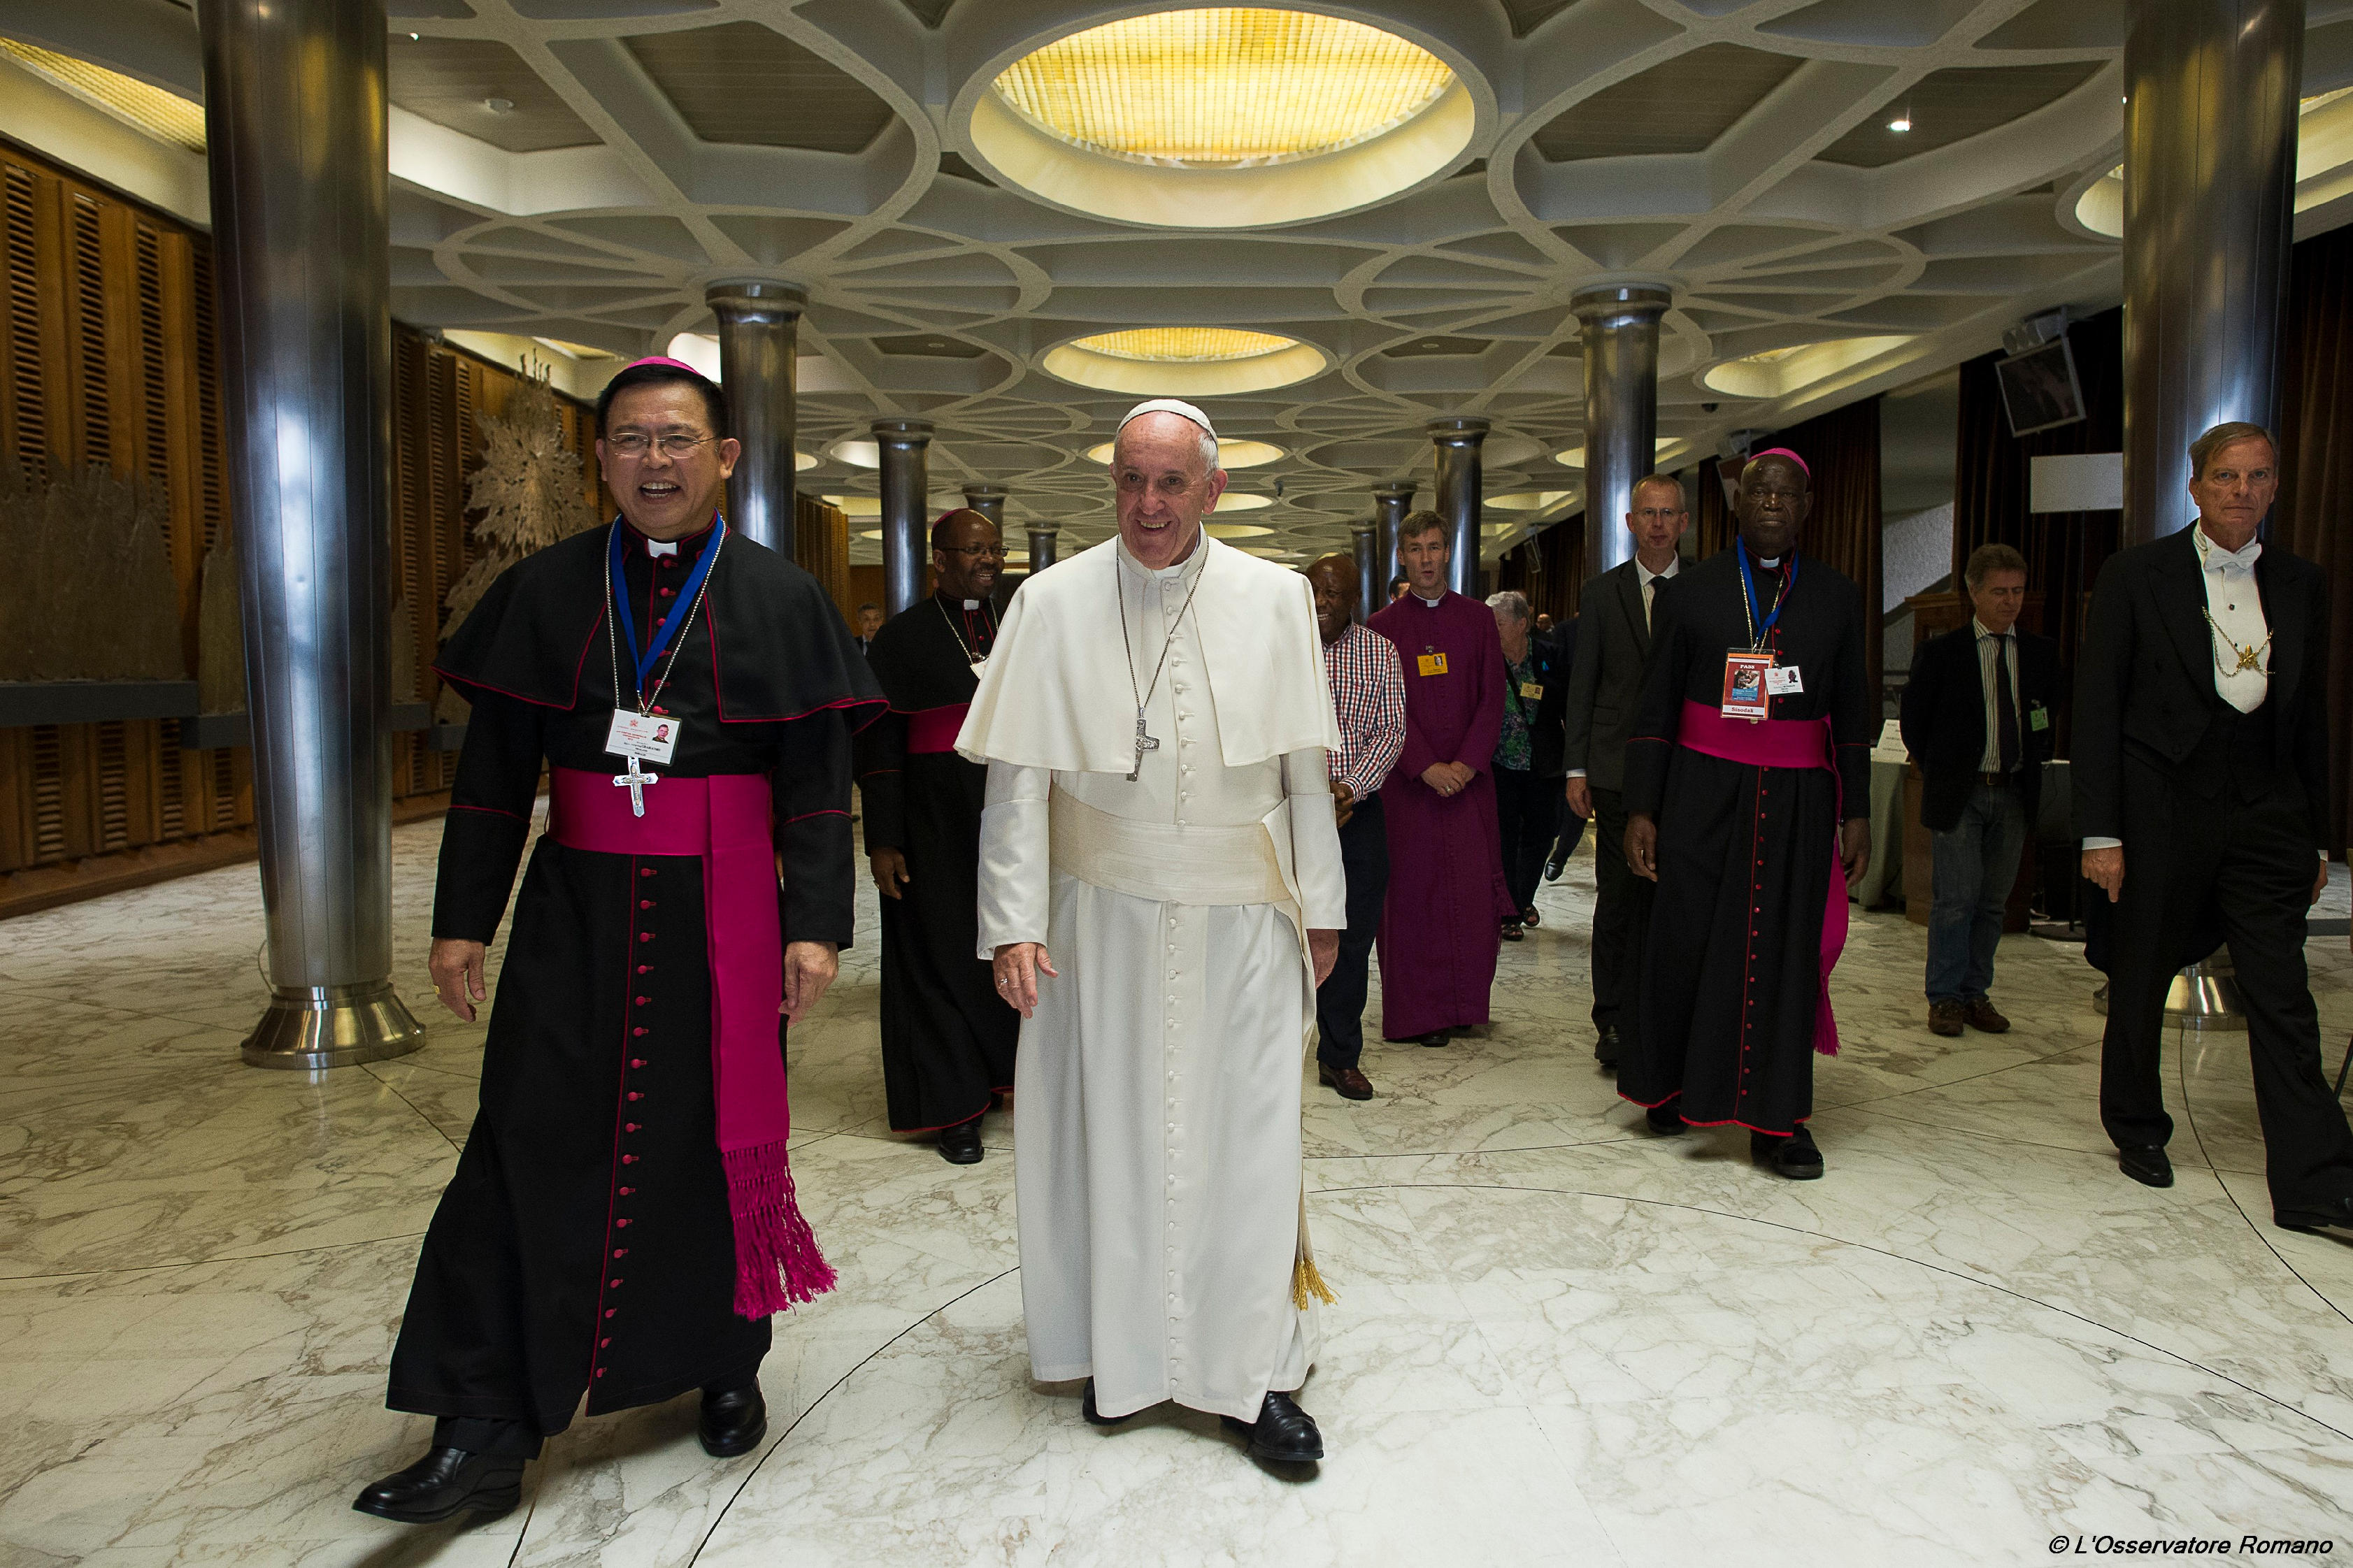 Pope Francis arrives at the Synod Hall for the first sessione of the Synod of Bishops